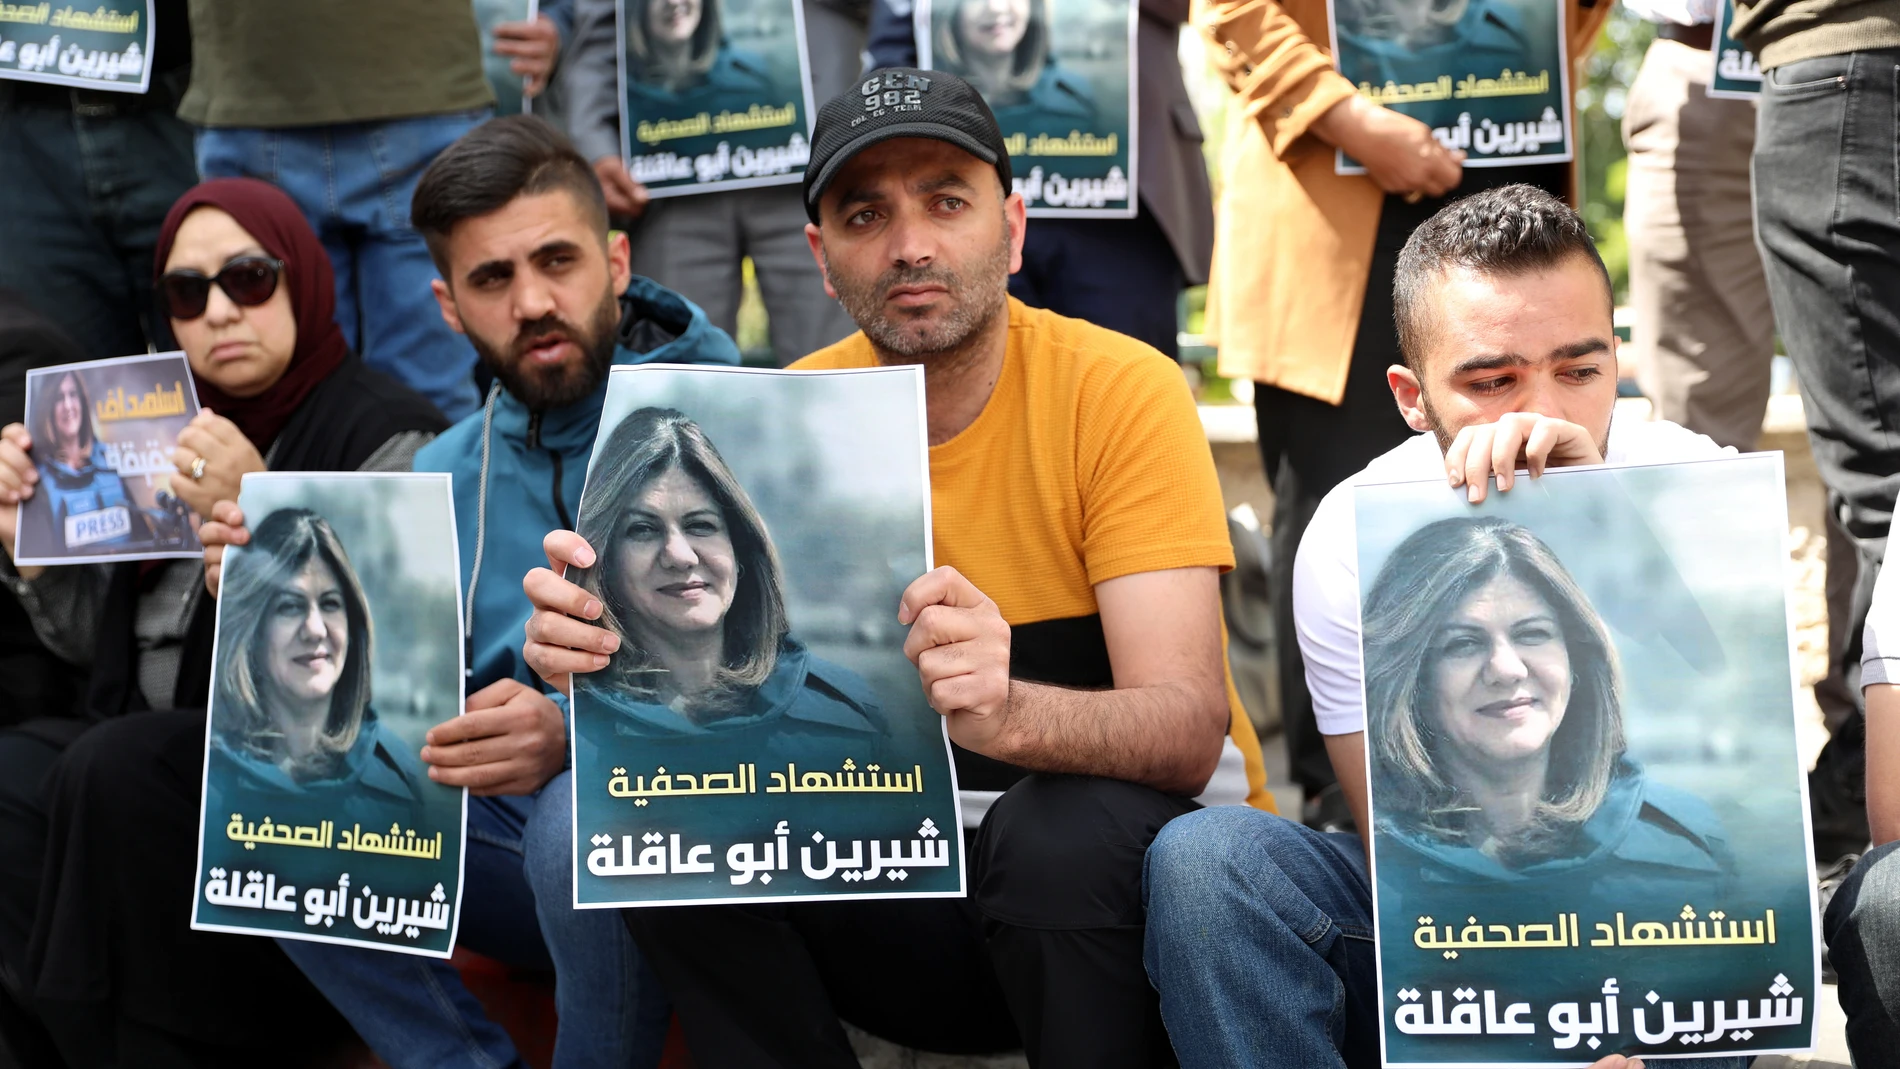 Hebron (-), 11/05/2022.- Palestinian journalists hold portraits of Al Jazeera journalist Shireen Abu Akleh, who was killed by gunfire in Jenin, during a protest in the West Bank city of Hebron, 11 May 2022. According to the Palestinian health ministry, Al Jazeera journalist Shireen Abu Akleh was shot and killed on 11 May 2022 by Israeli forces during an Israeli raid in the West Bank town of Jenin. (Protestas, Incendio) EFE/EPA/ABED AL HASHLAMOUN